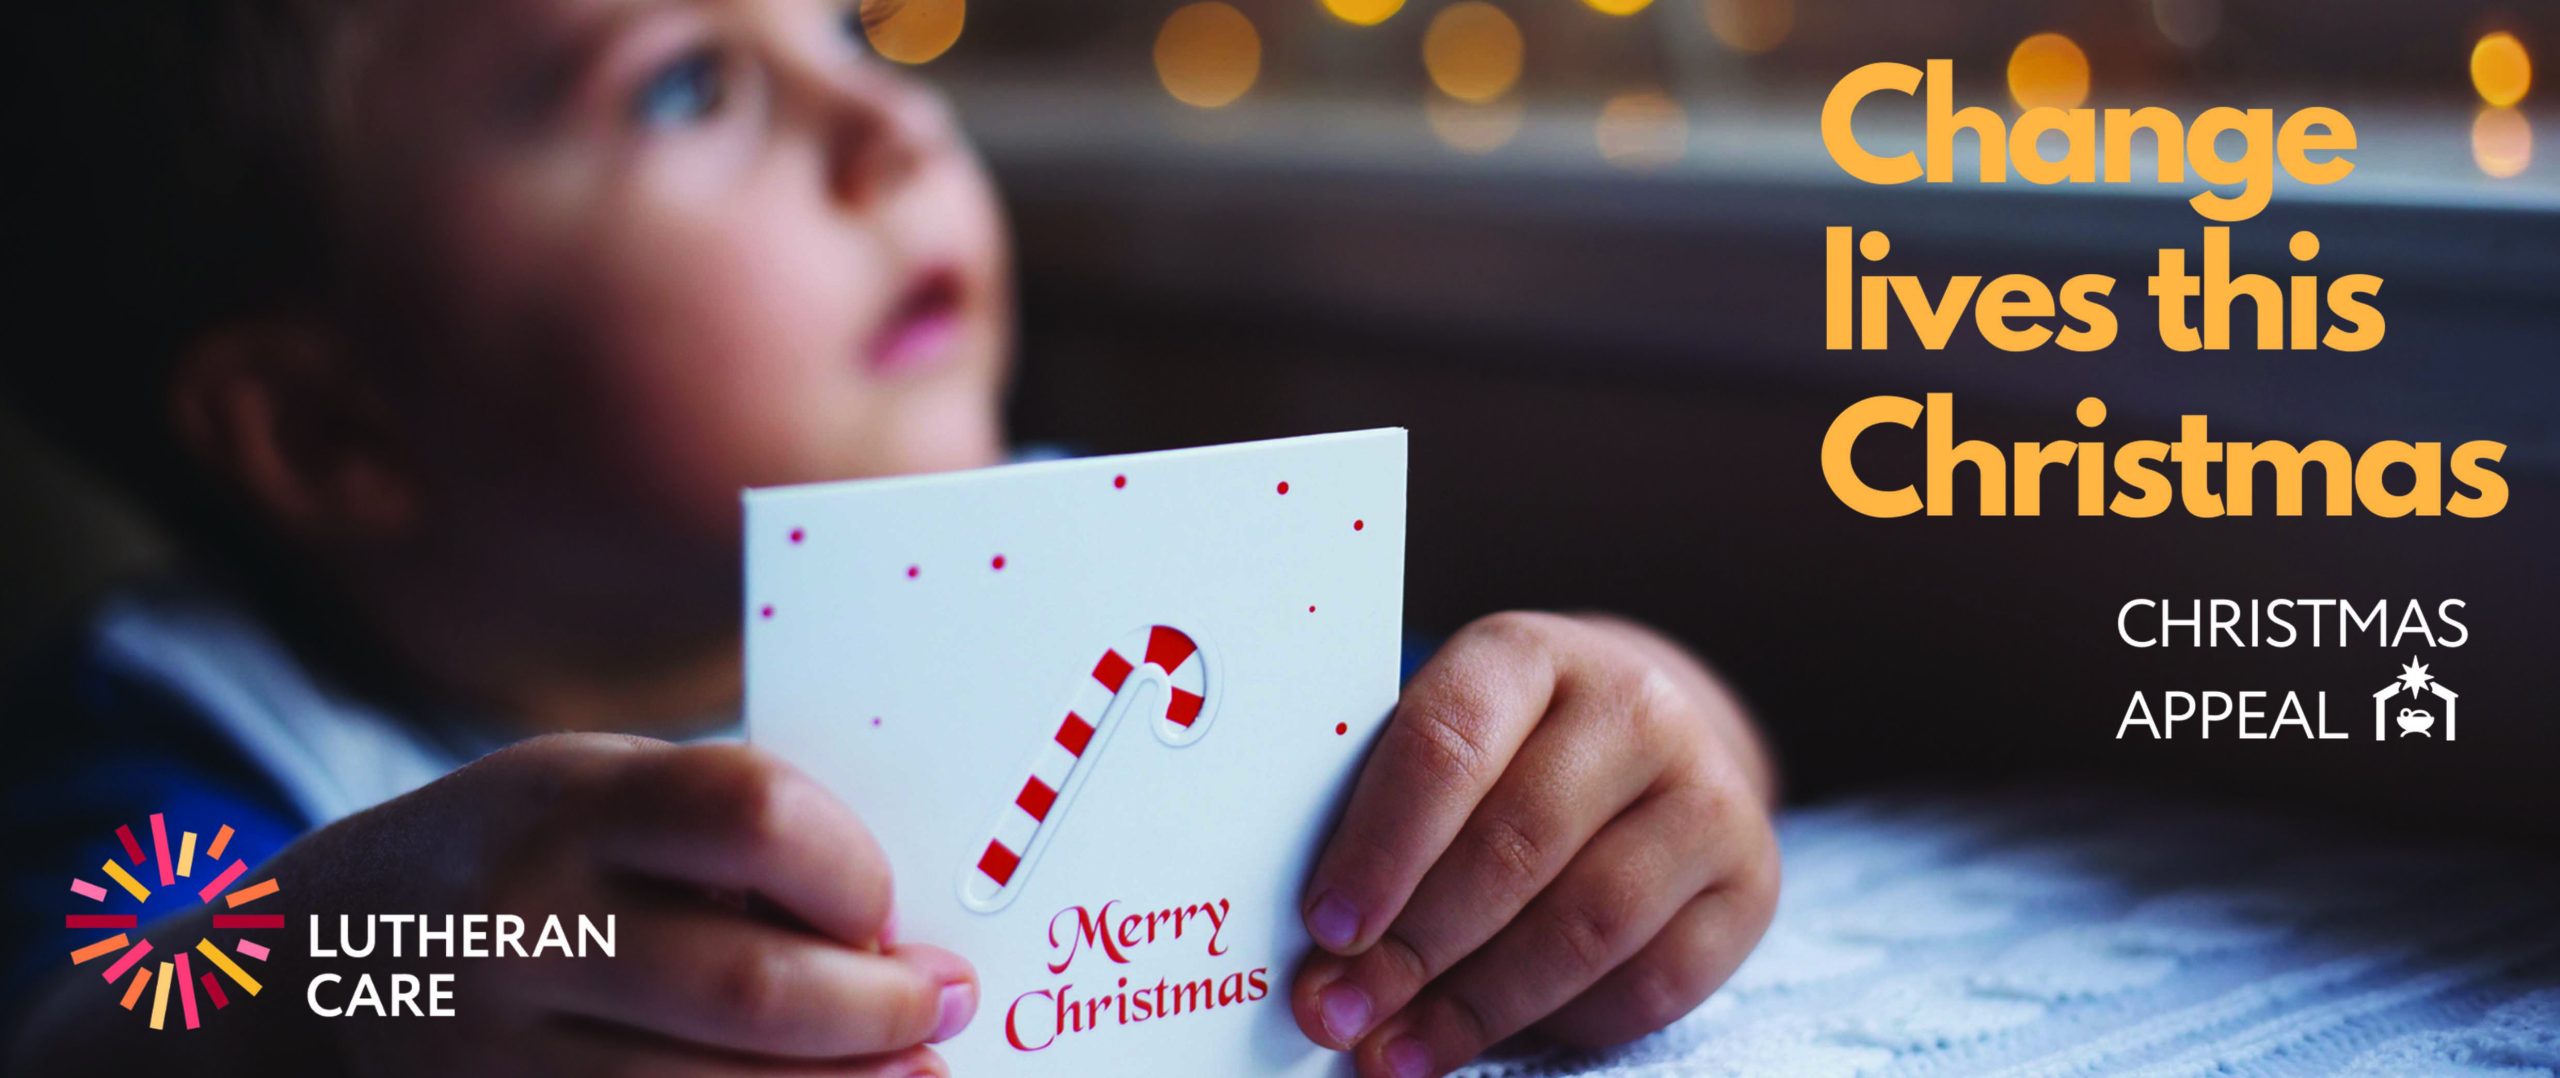 Image of young child holding a card that says Merry Christmas, additional text says change lives this Christmas Christmas Appeal. The Lutheran Care logo appears in the bottom left hand corner